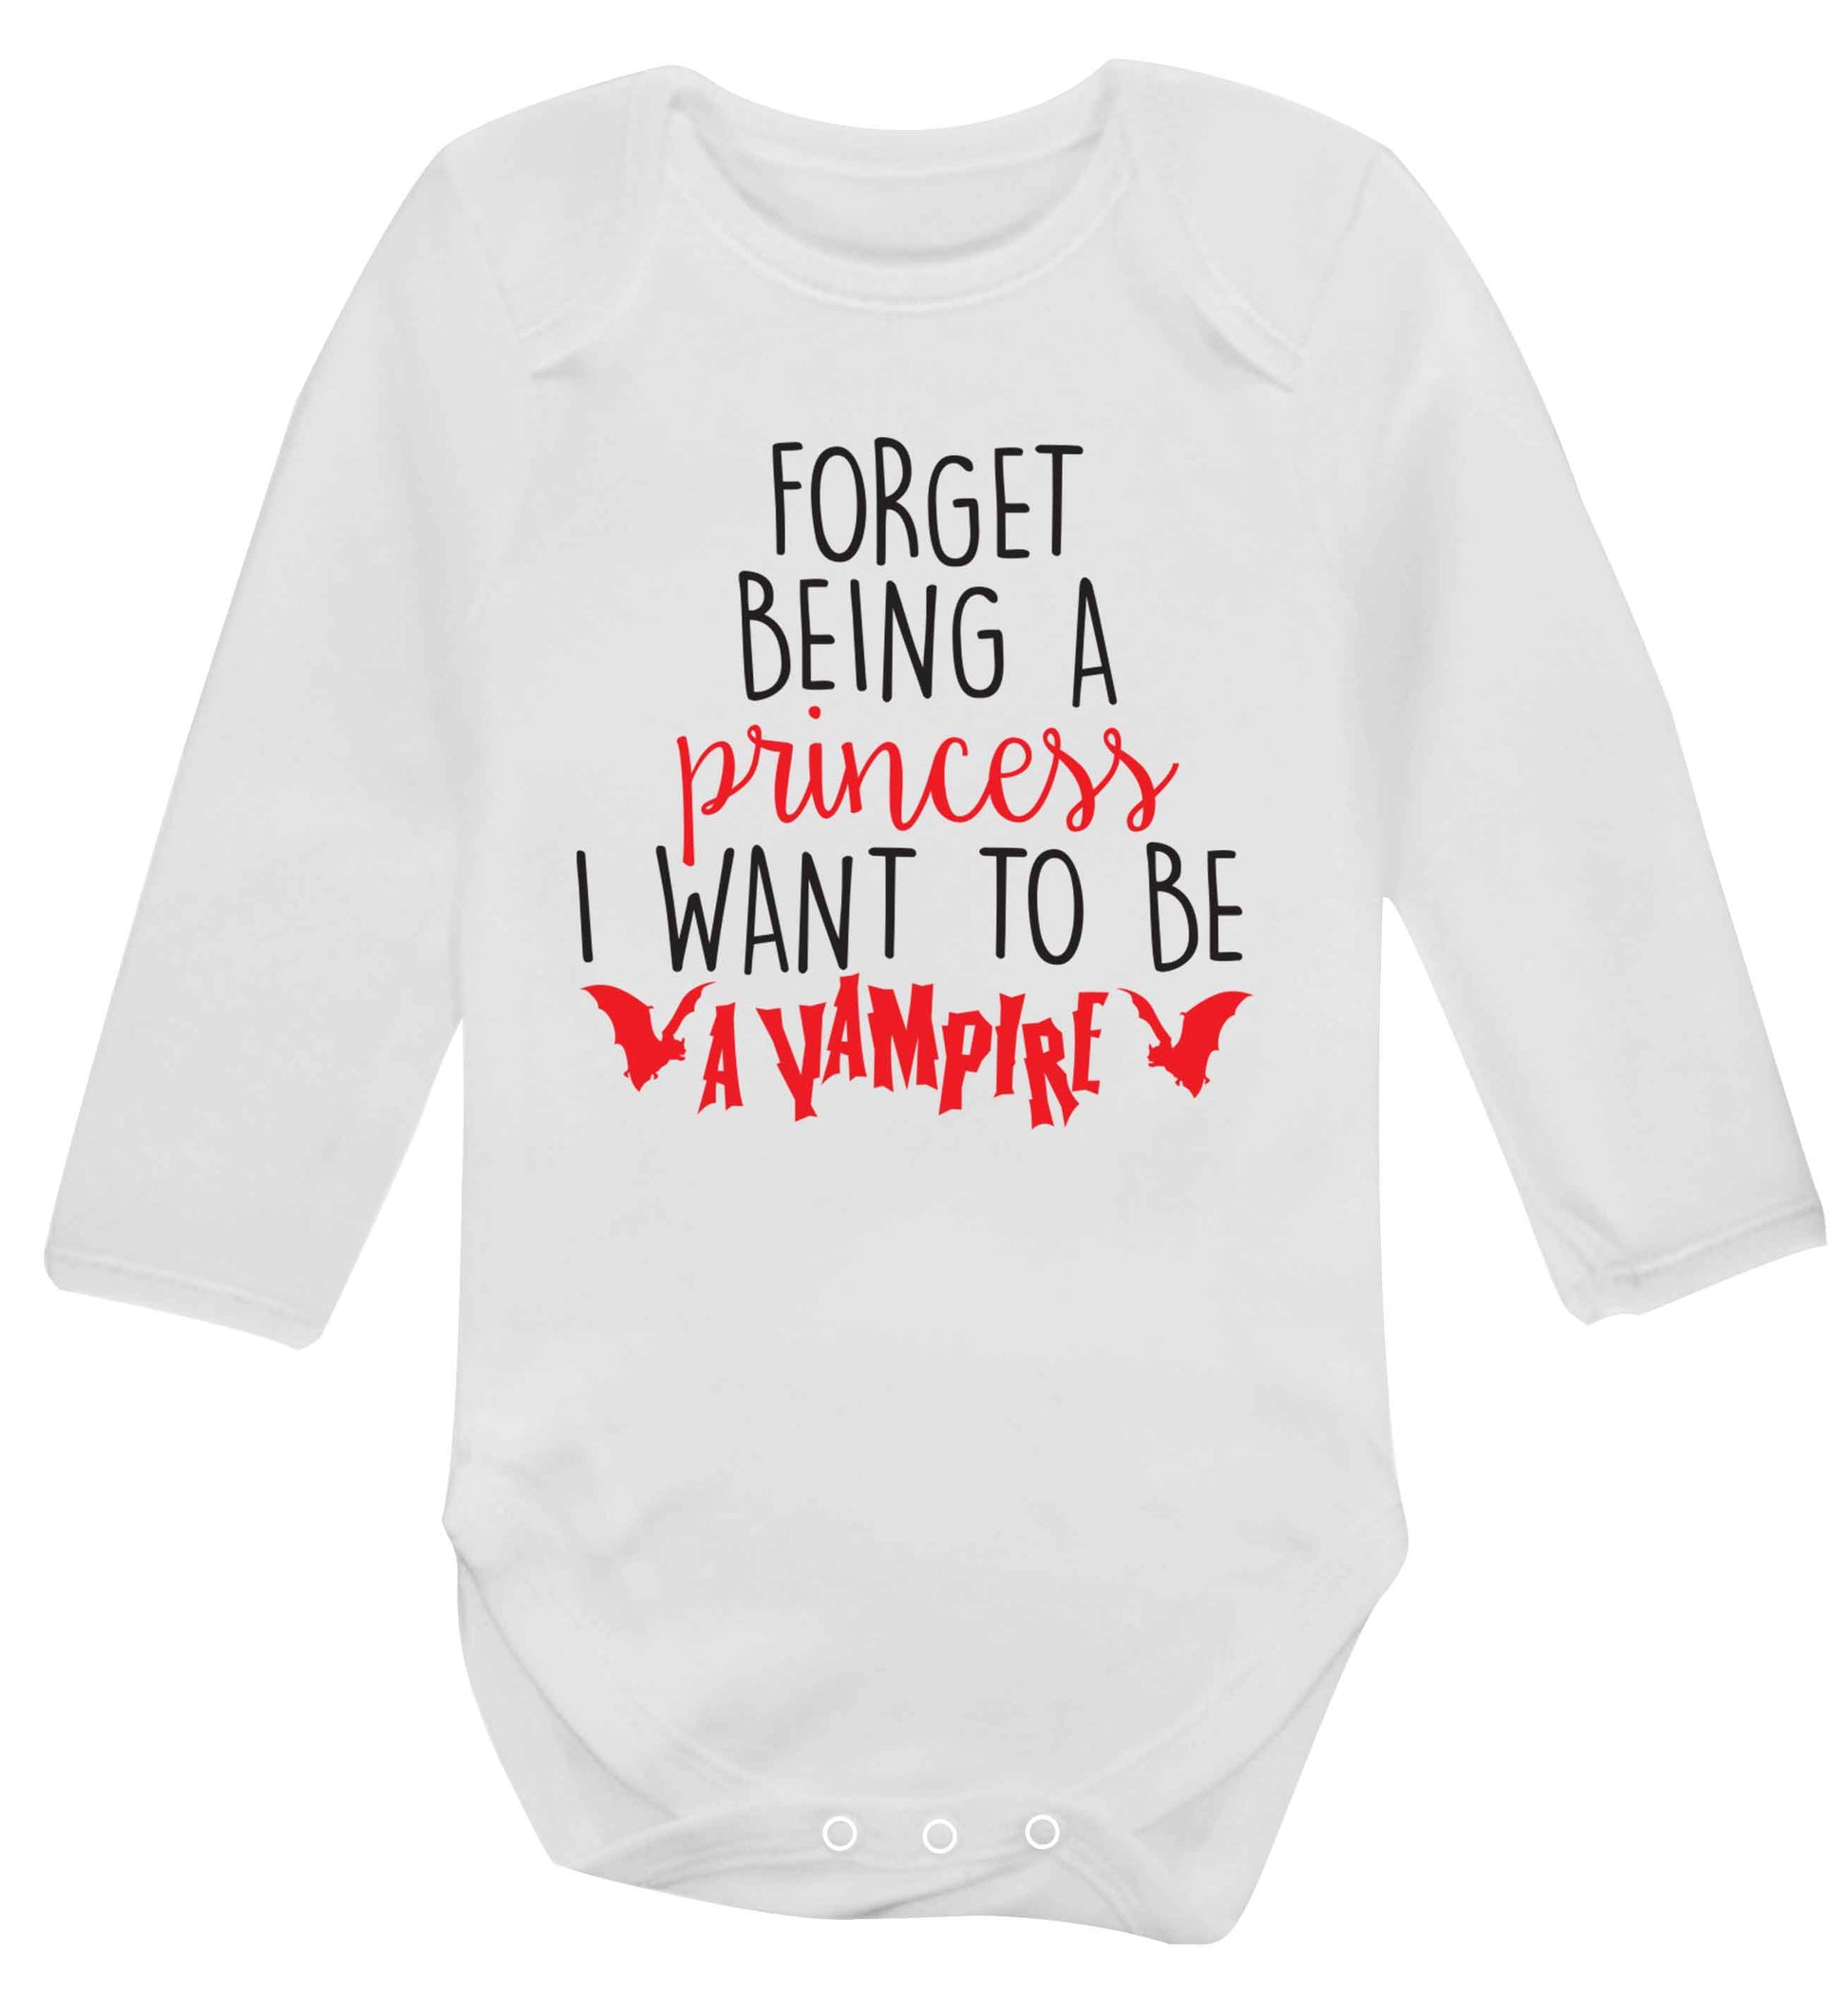 Forget being a princess I want to be a vampire Baby Vest long sleeved white 6-12 months